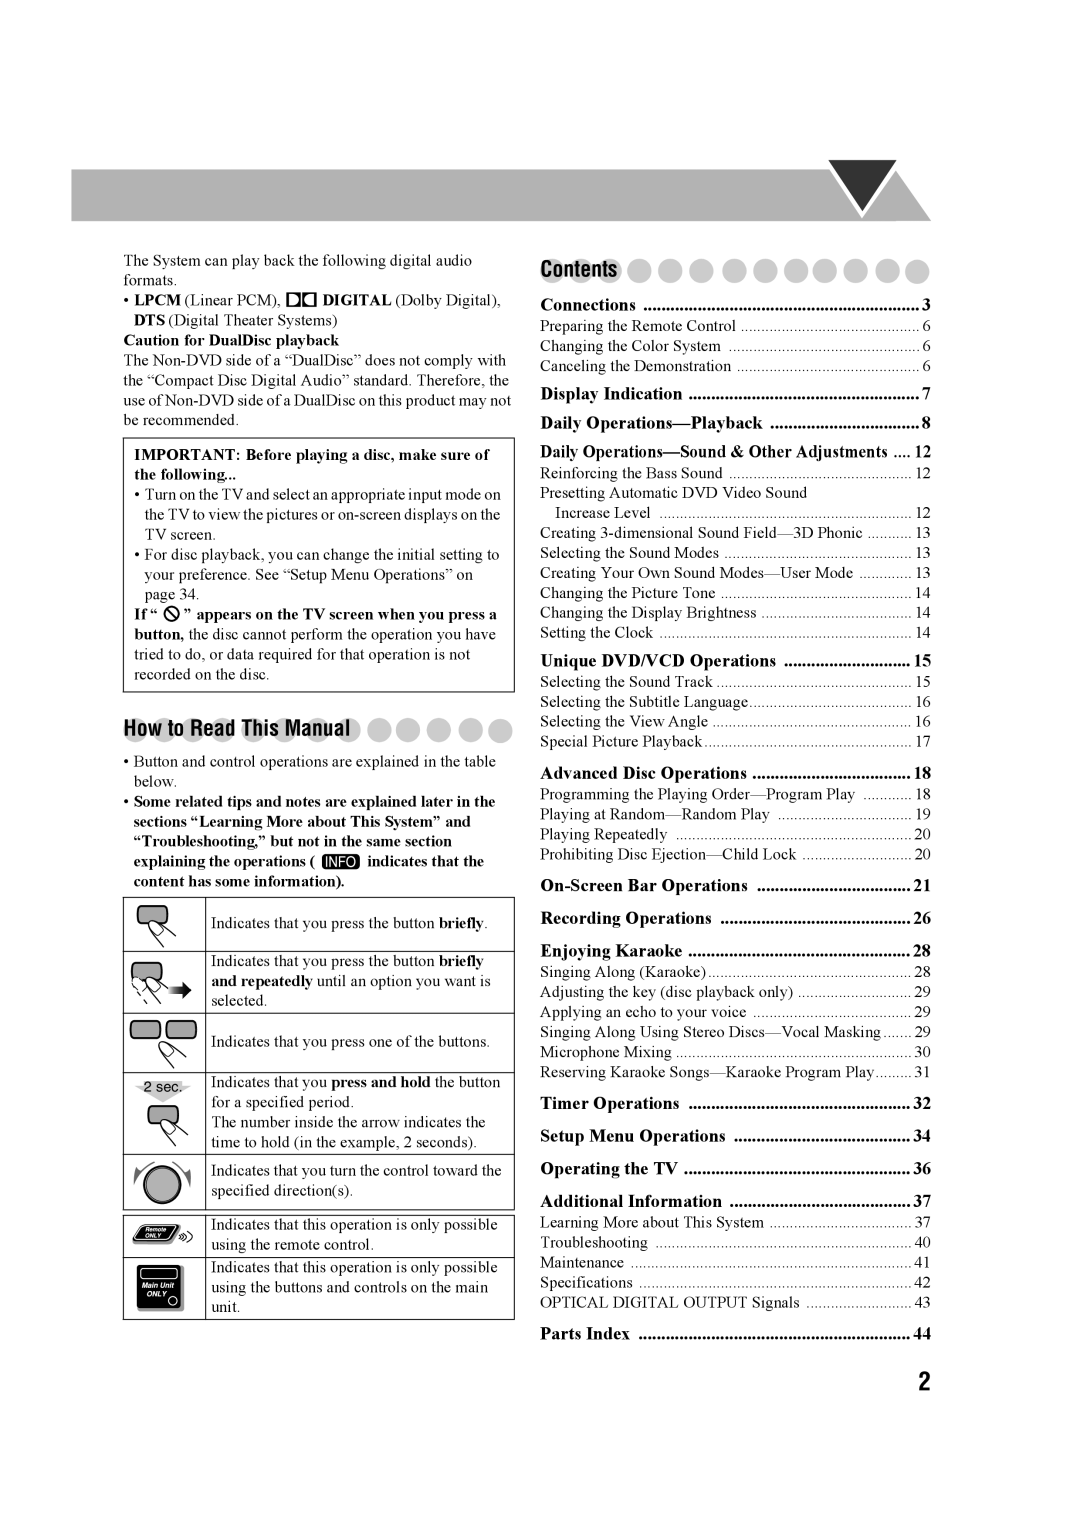 JVC CA-MXDK11 manual How to Read This Manual, Contents 